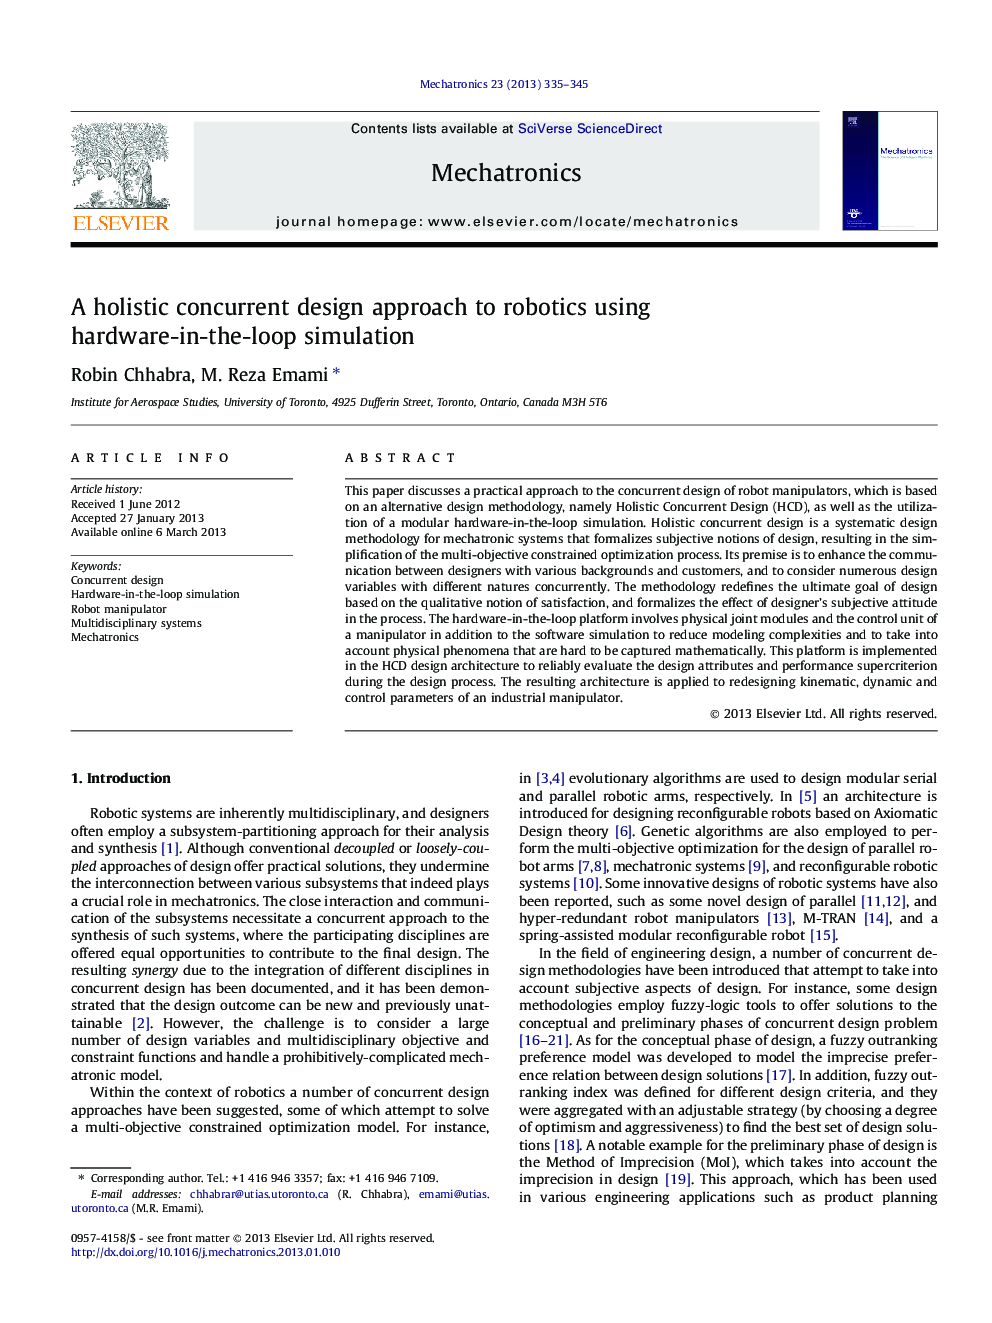 A holistic concurrent design approach to robotics using hardware-in-the-loop simulation